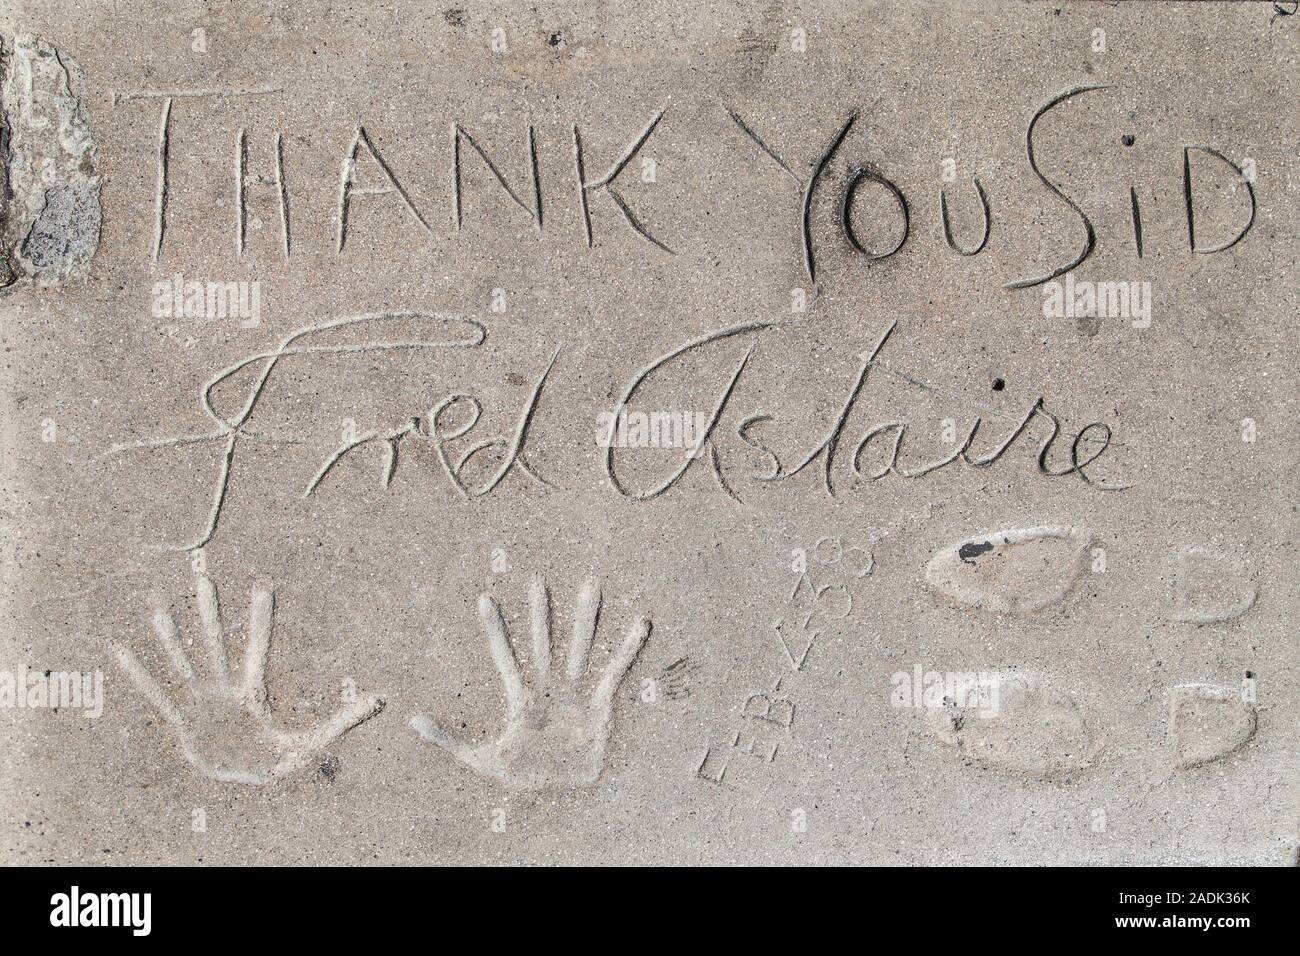 Los Angeles, California - September 07, 2019: Hand and footprints of actor Fred Astaire in the Grauman's Chinese Theatre forecourt, Hollywood. Stock Photo